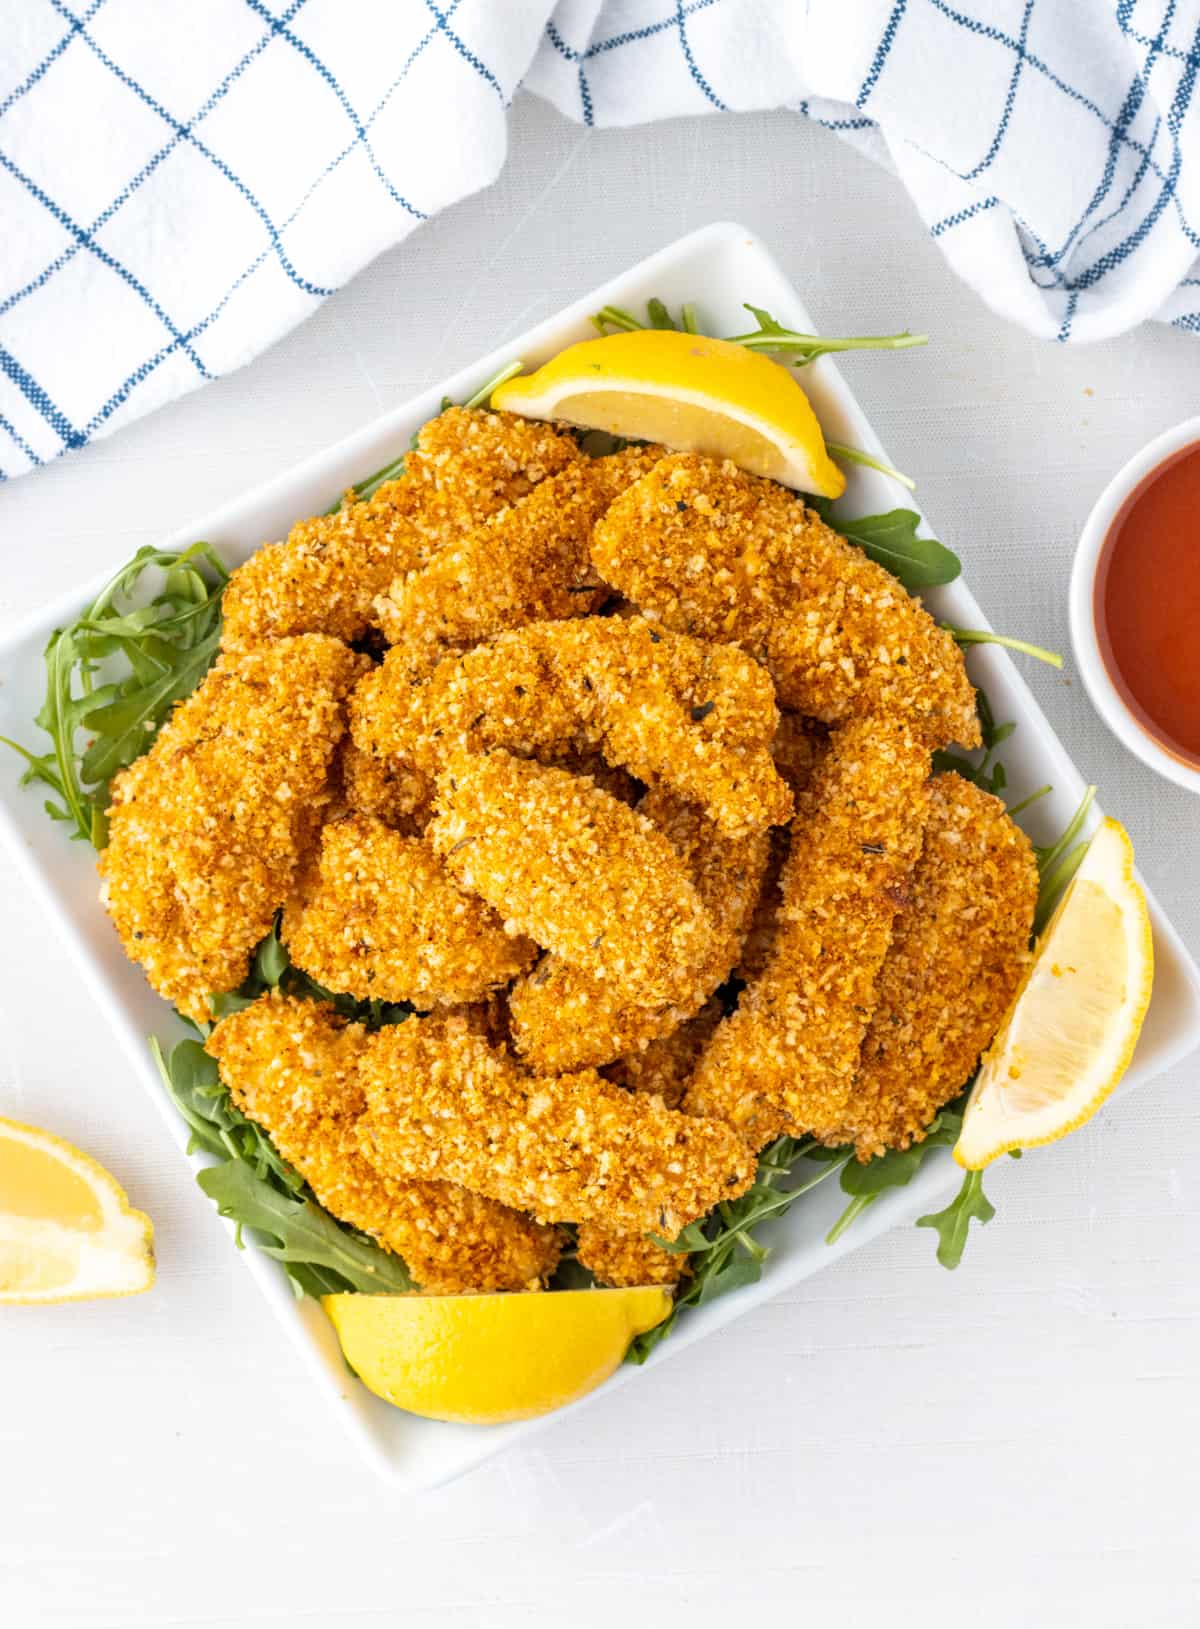 Panko crusted chicken strips on a plate with lemon wedges and a bowl of sauce on the side.